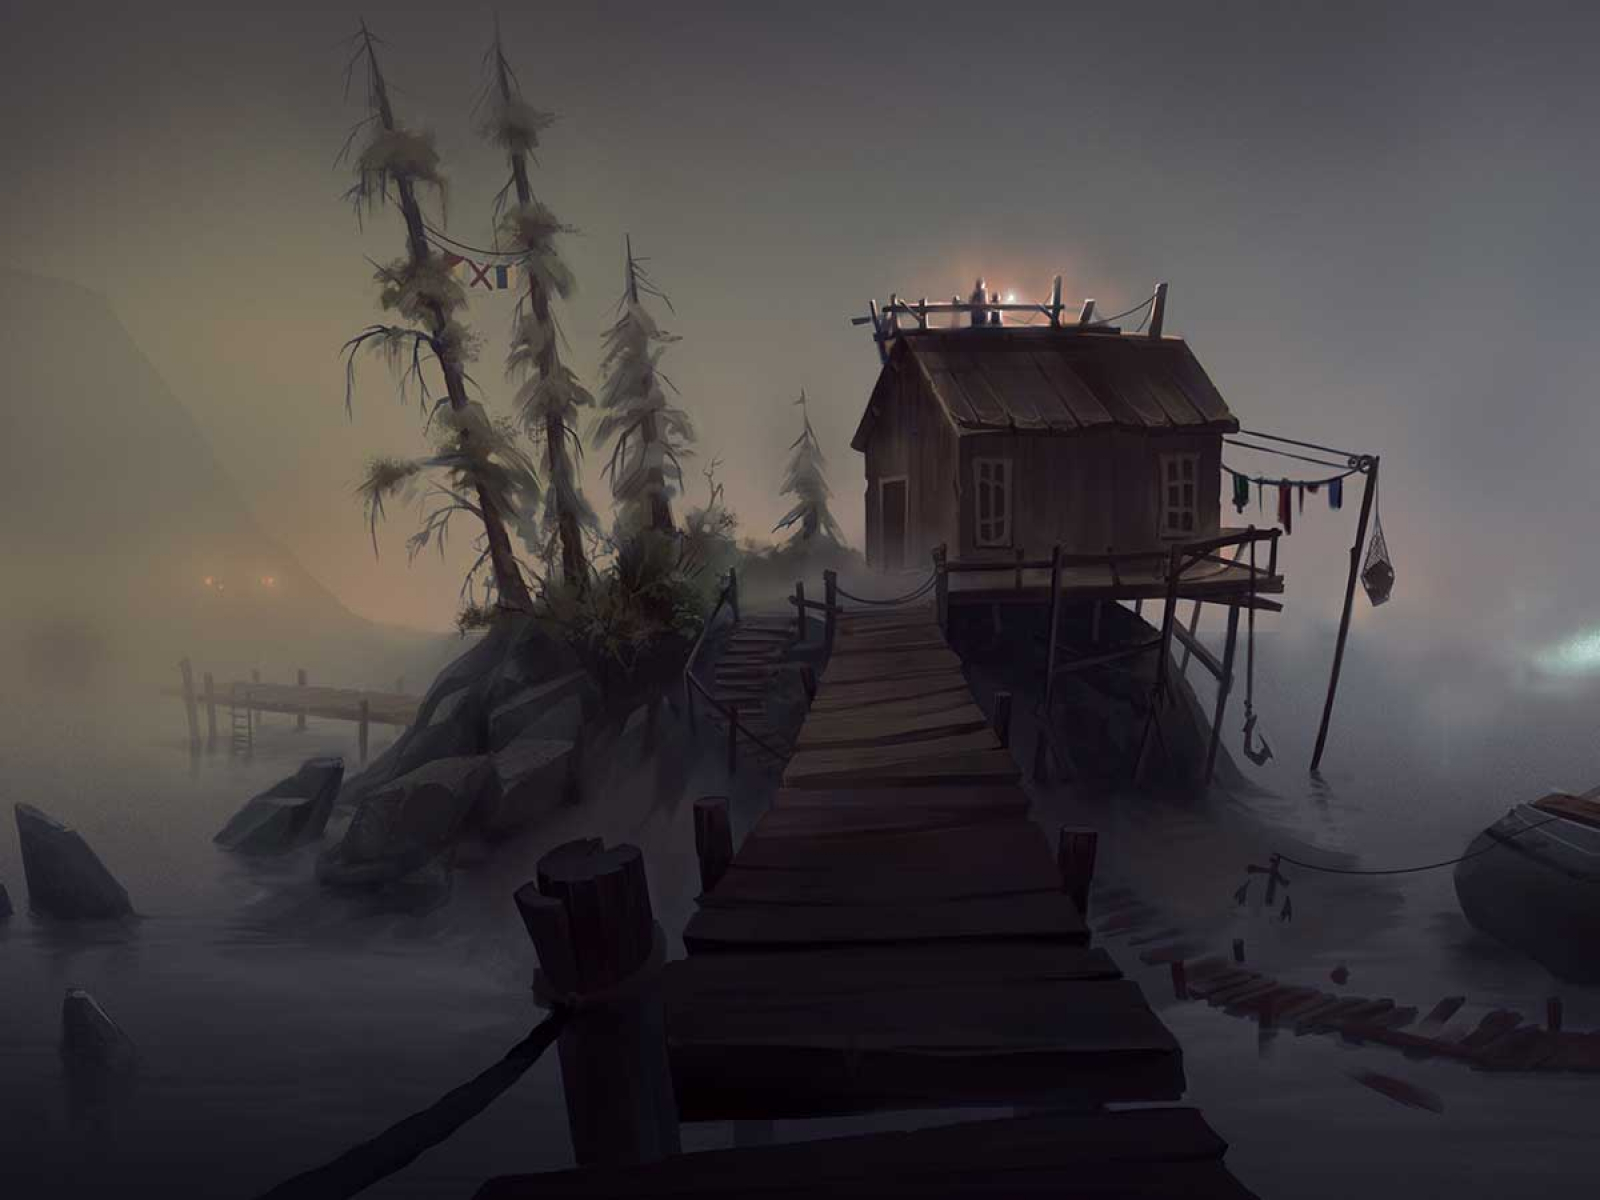 A rickety house stands on a rock within a gloomy swamp environment.